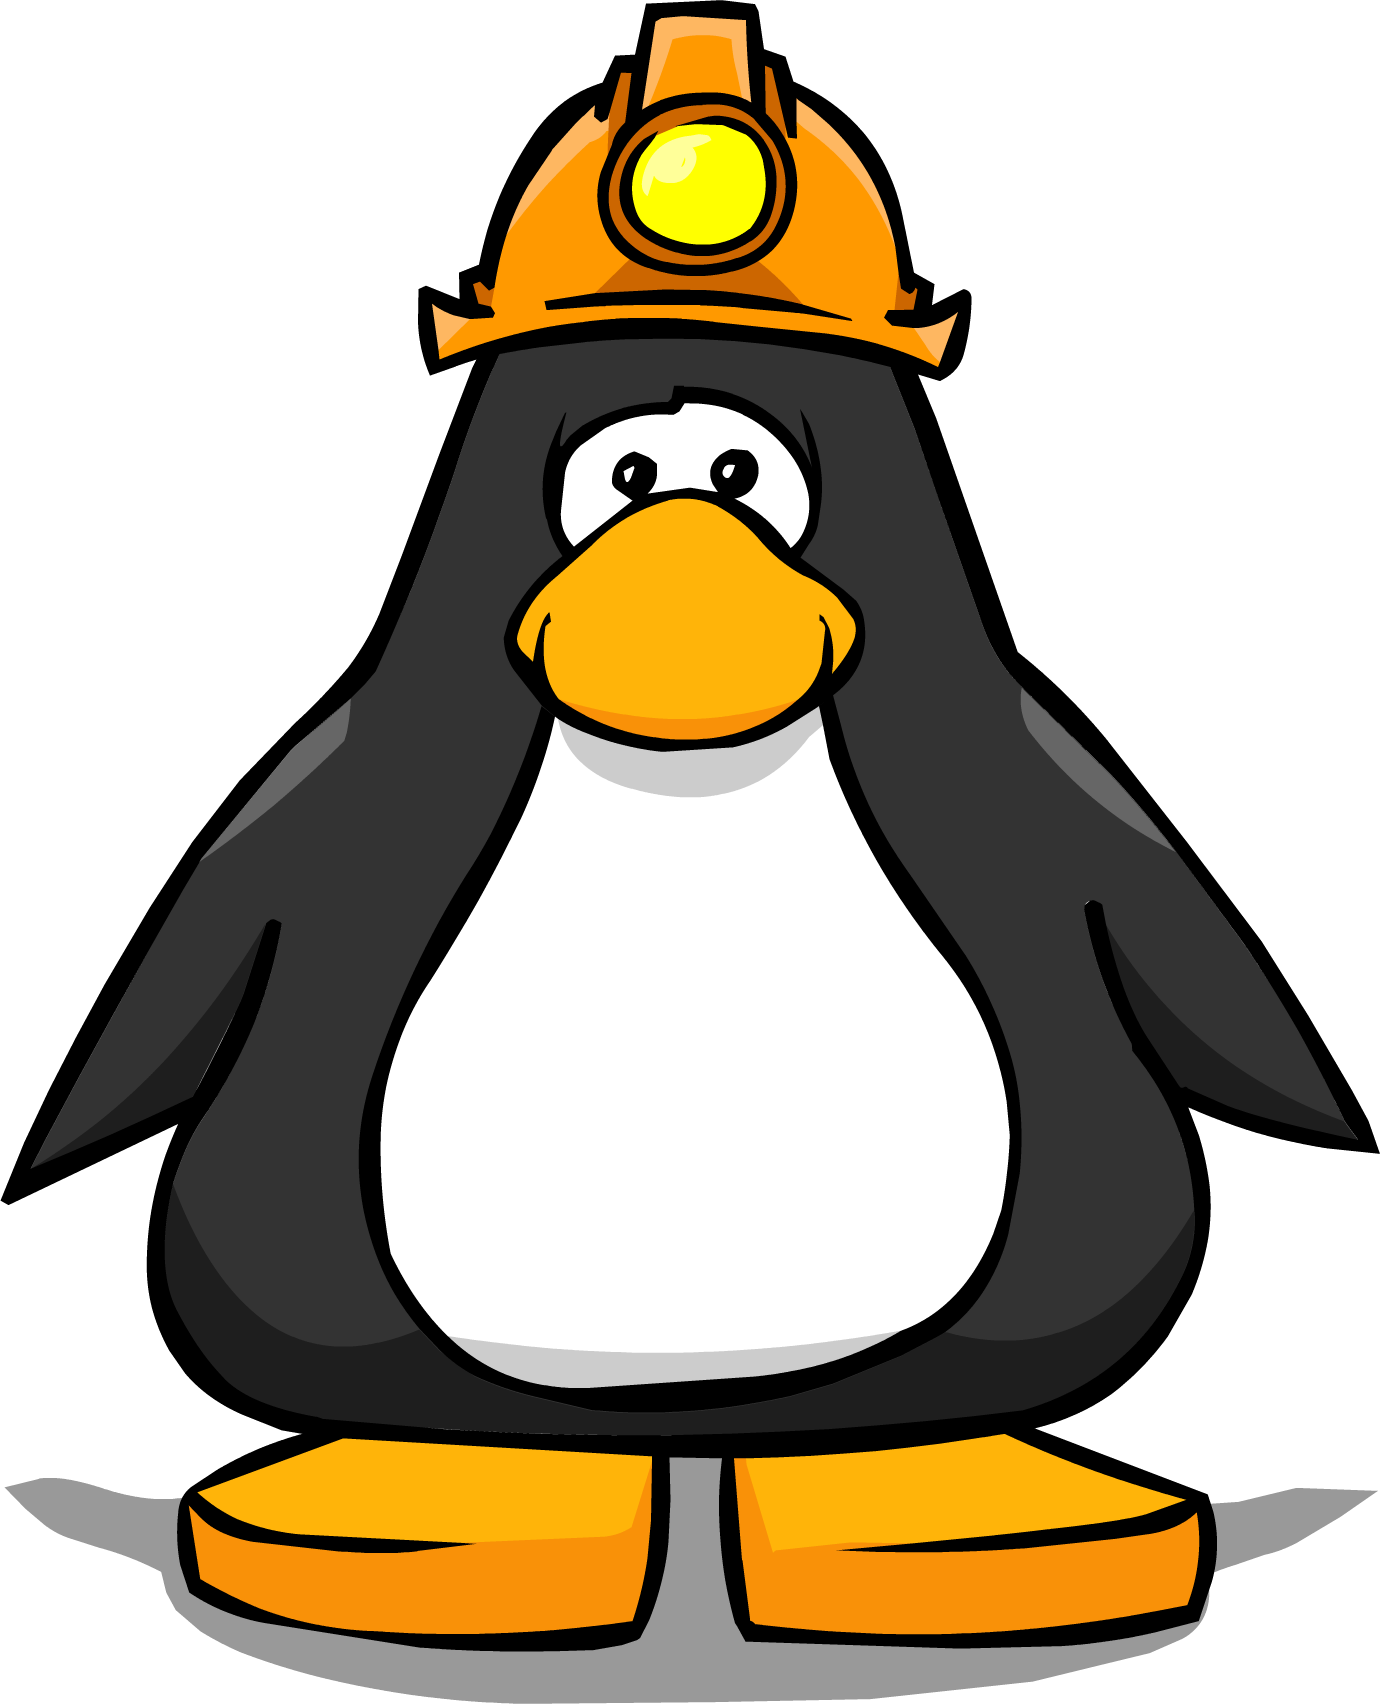 https://vignette.wikia.nocookie.net/clubpenguin/images/6/6c/Miners_Helmet_from_a_Player_Card.PNG/revision/latest?cb=20140727155301